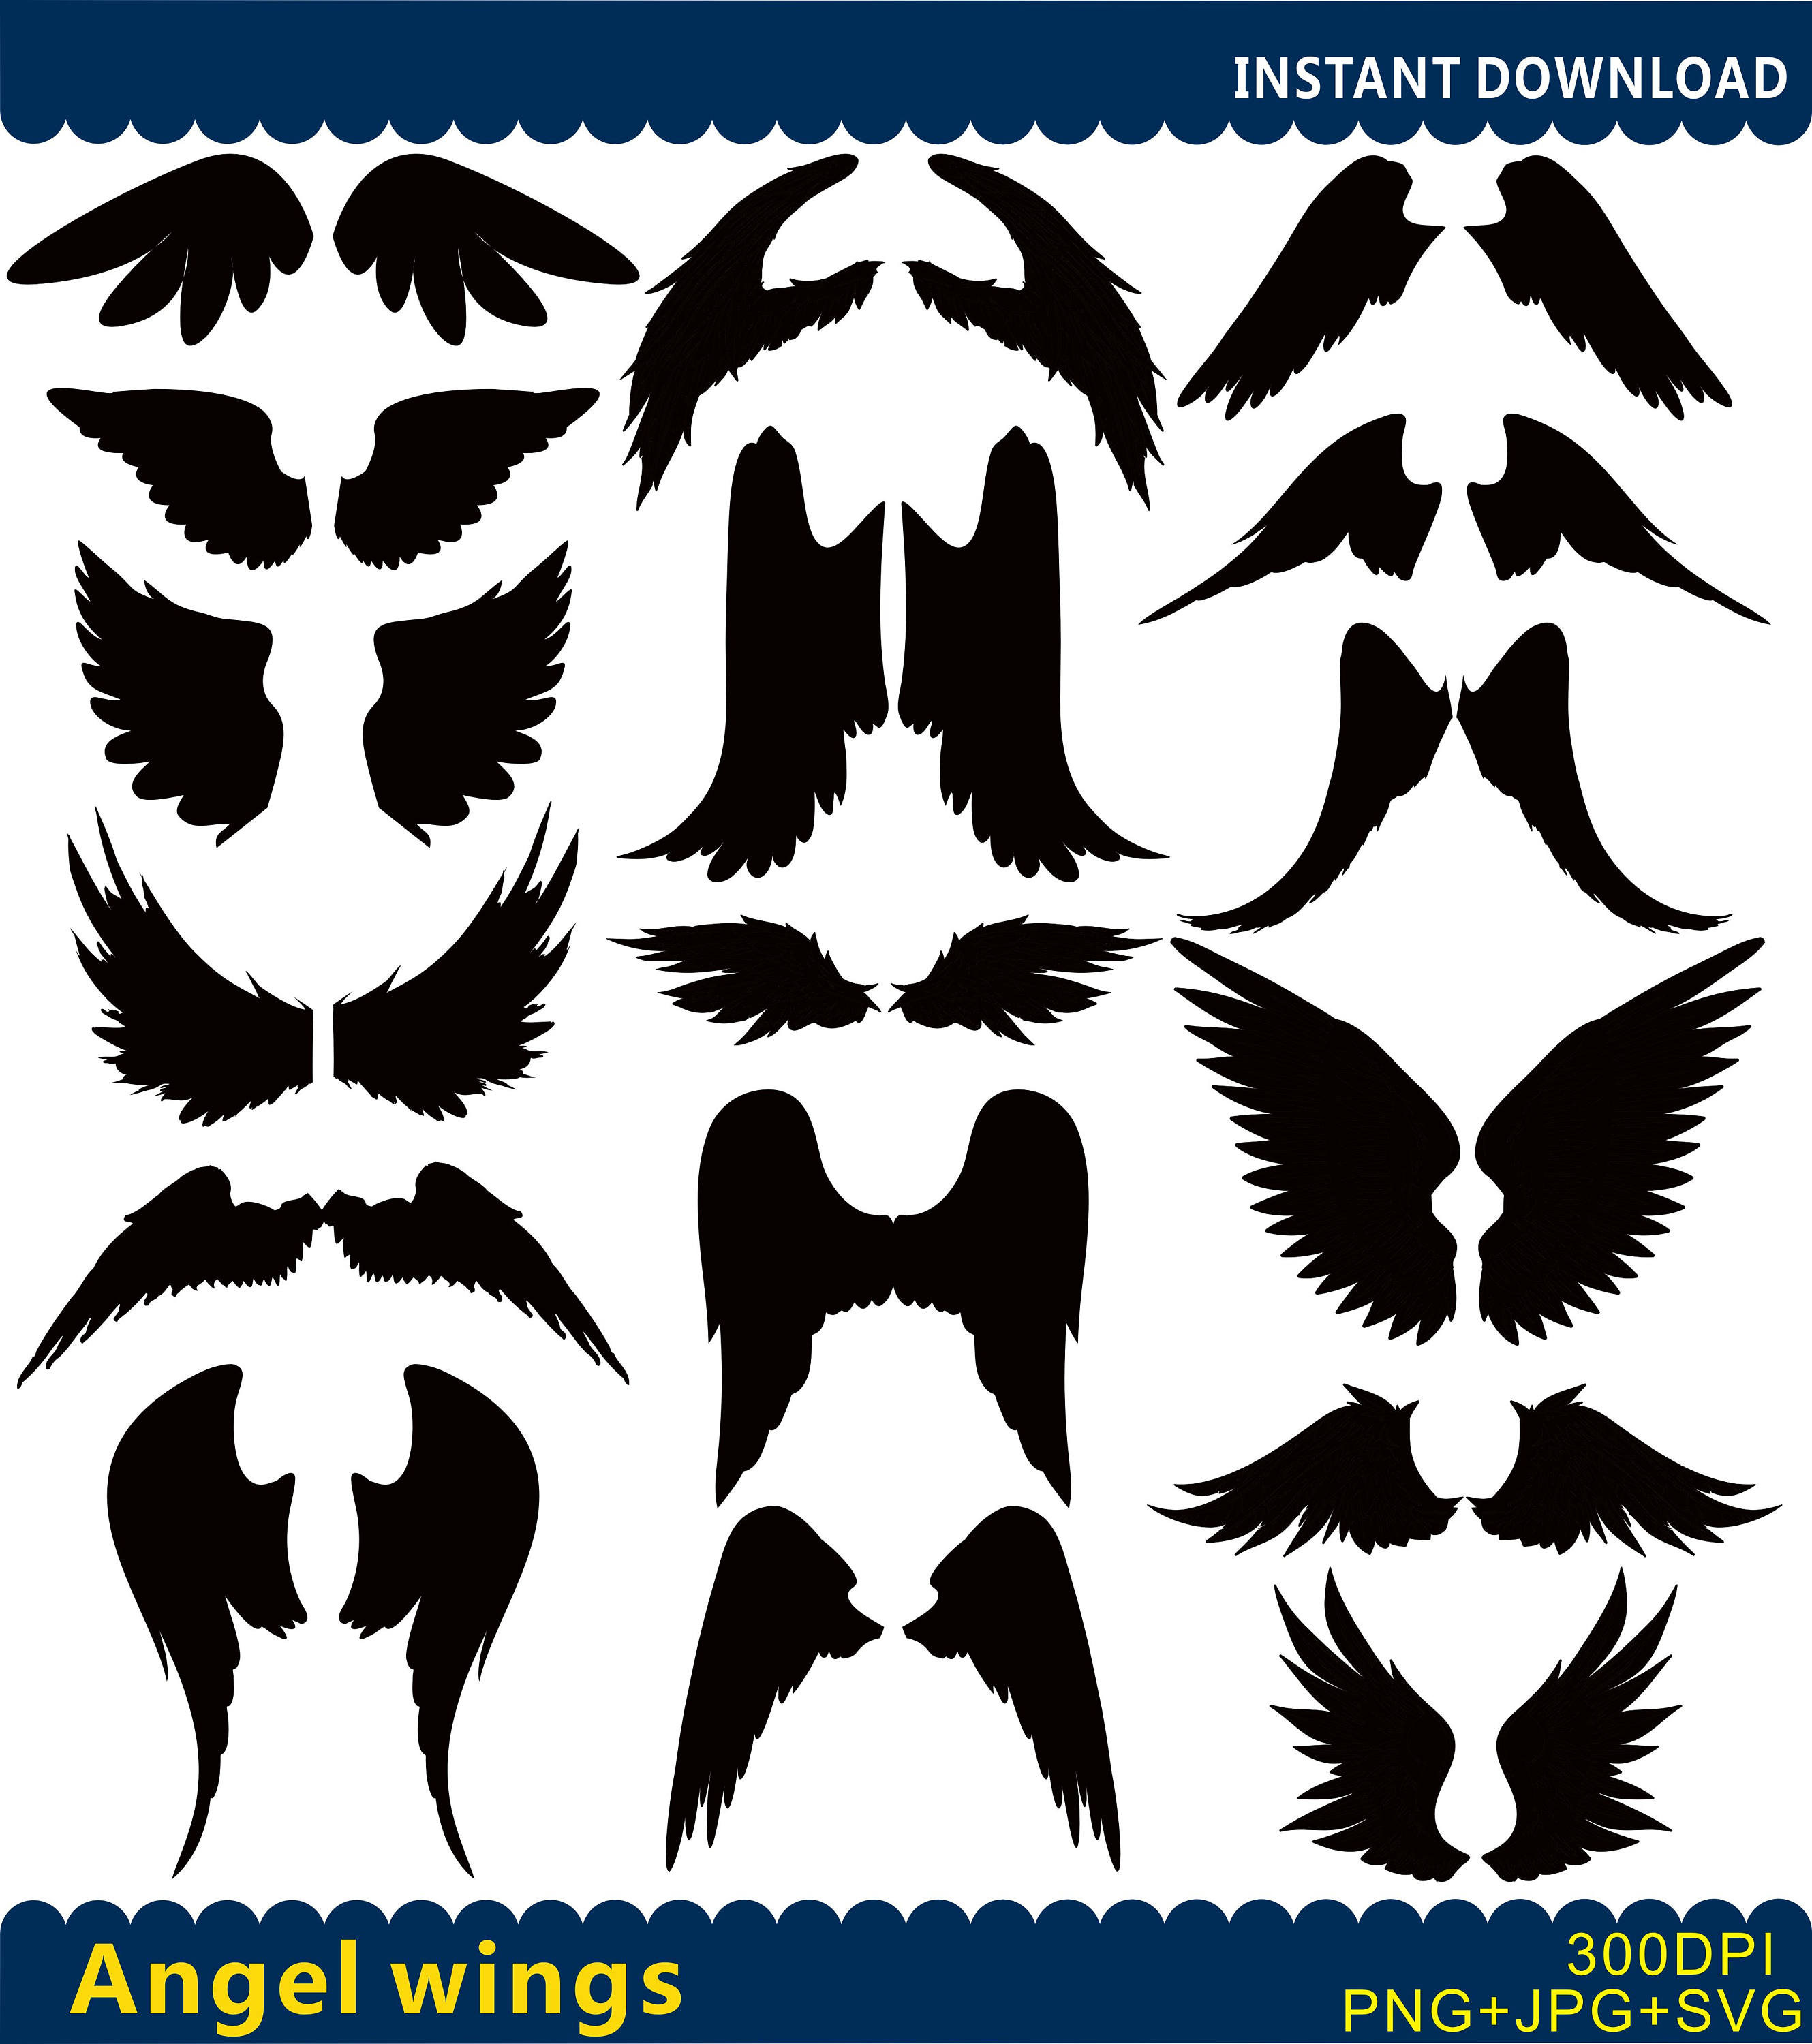 Download Angel Wings SVG Angel Wings Clipart Angel Silhouettes